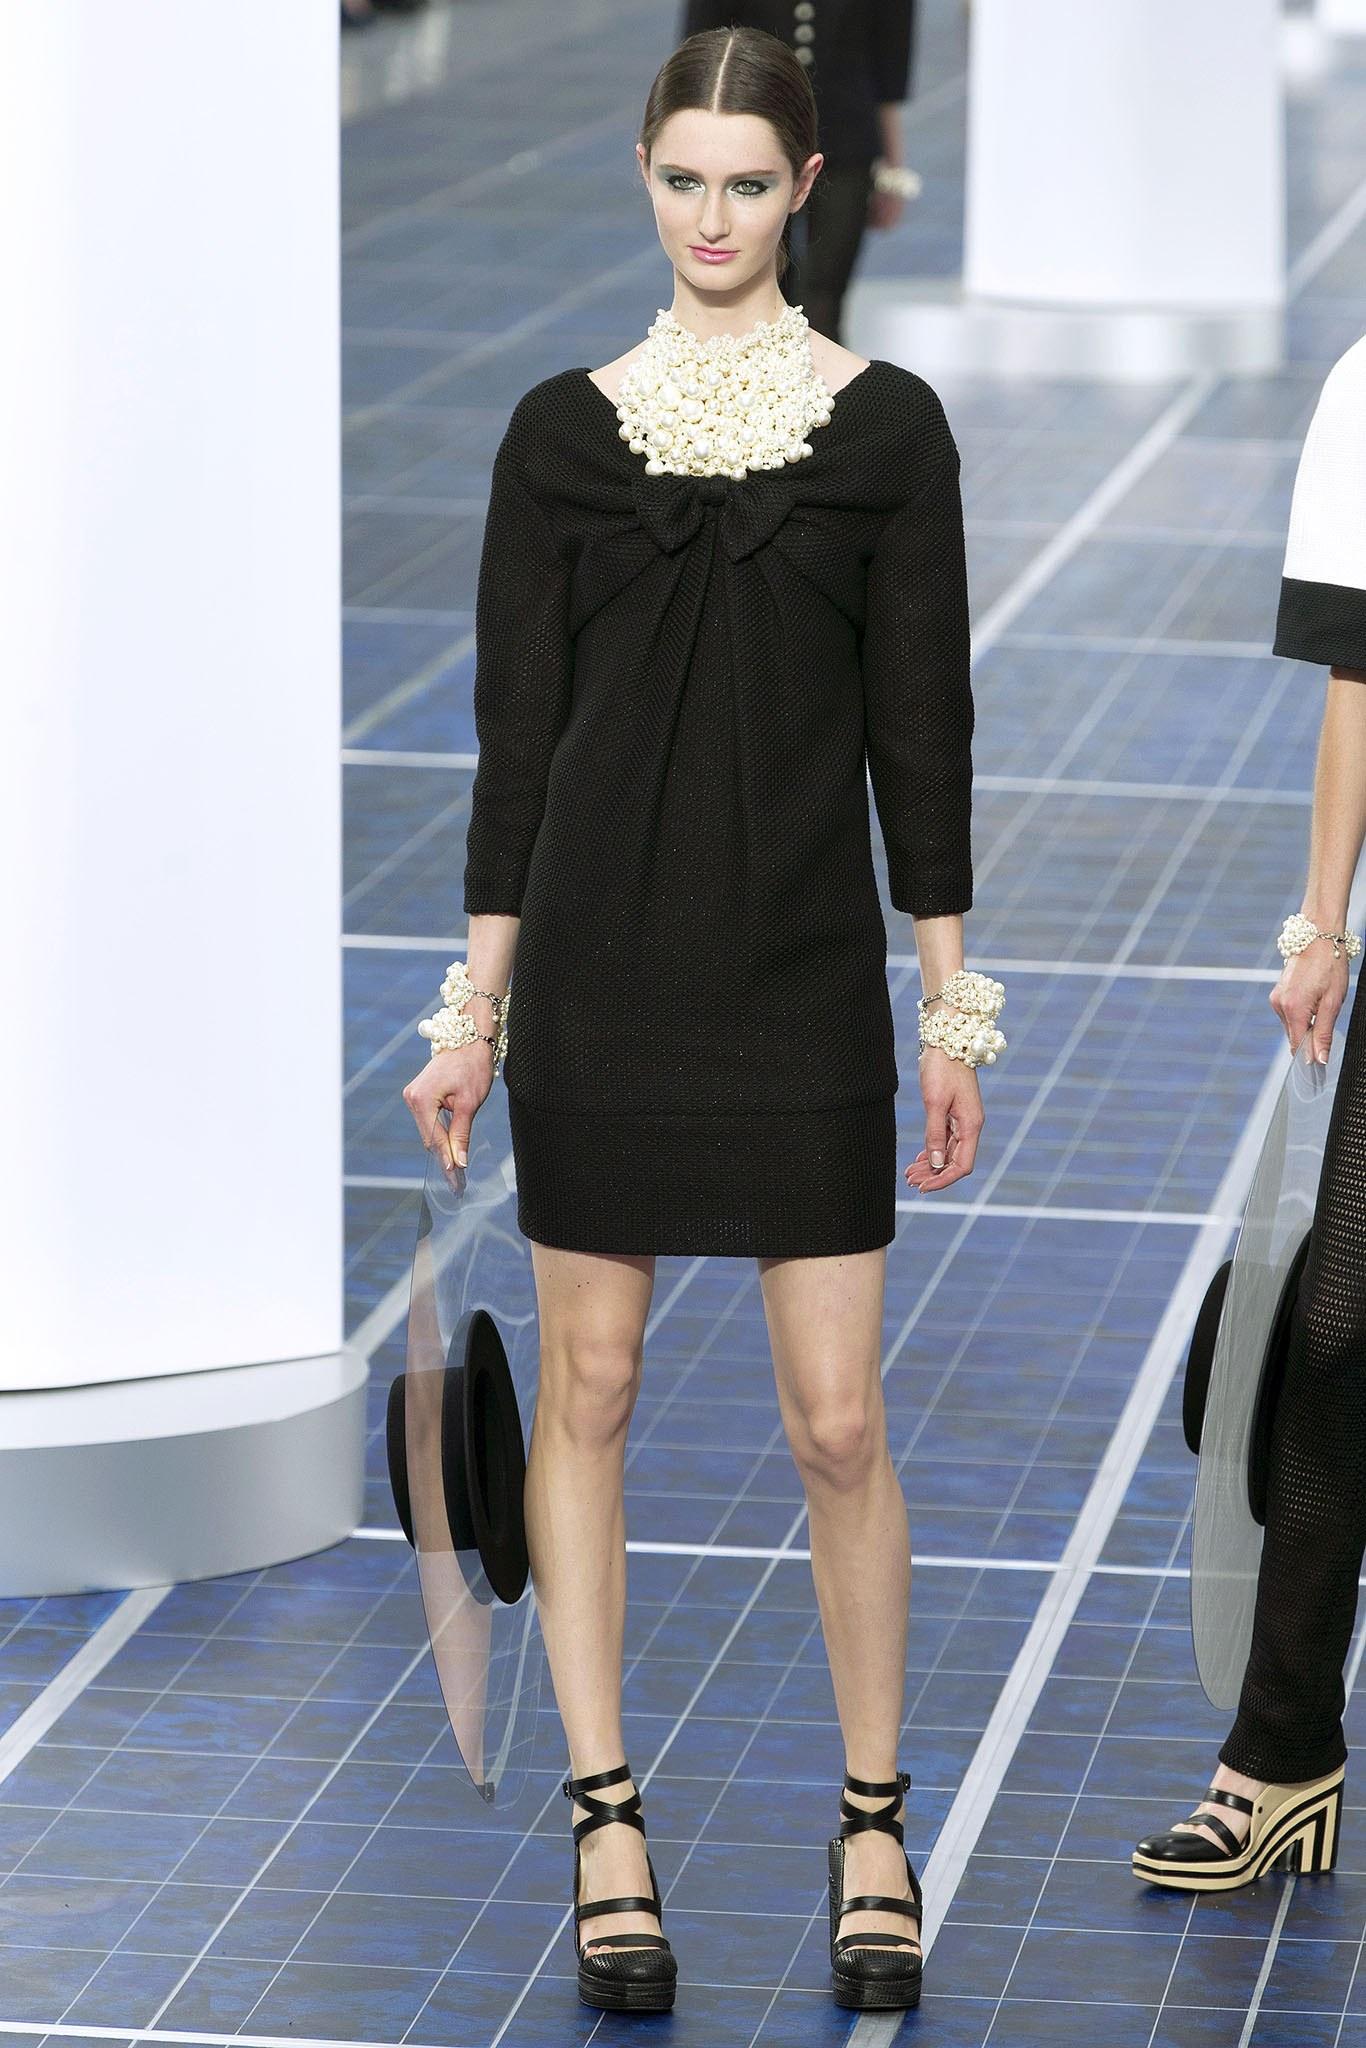 Chanel Spring 2013 Runway Black Woven Dress with Bows.  Deep V-neckline at front and back with bow accent.  Centre back invisible zipper, bracelet length sleeves,  side hip pockets on seam.  Open weave design with a slight shimmer.  Marked size FR42